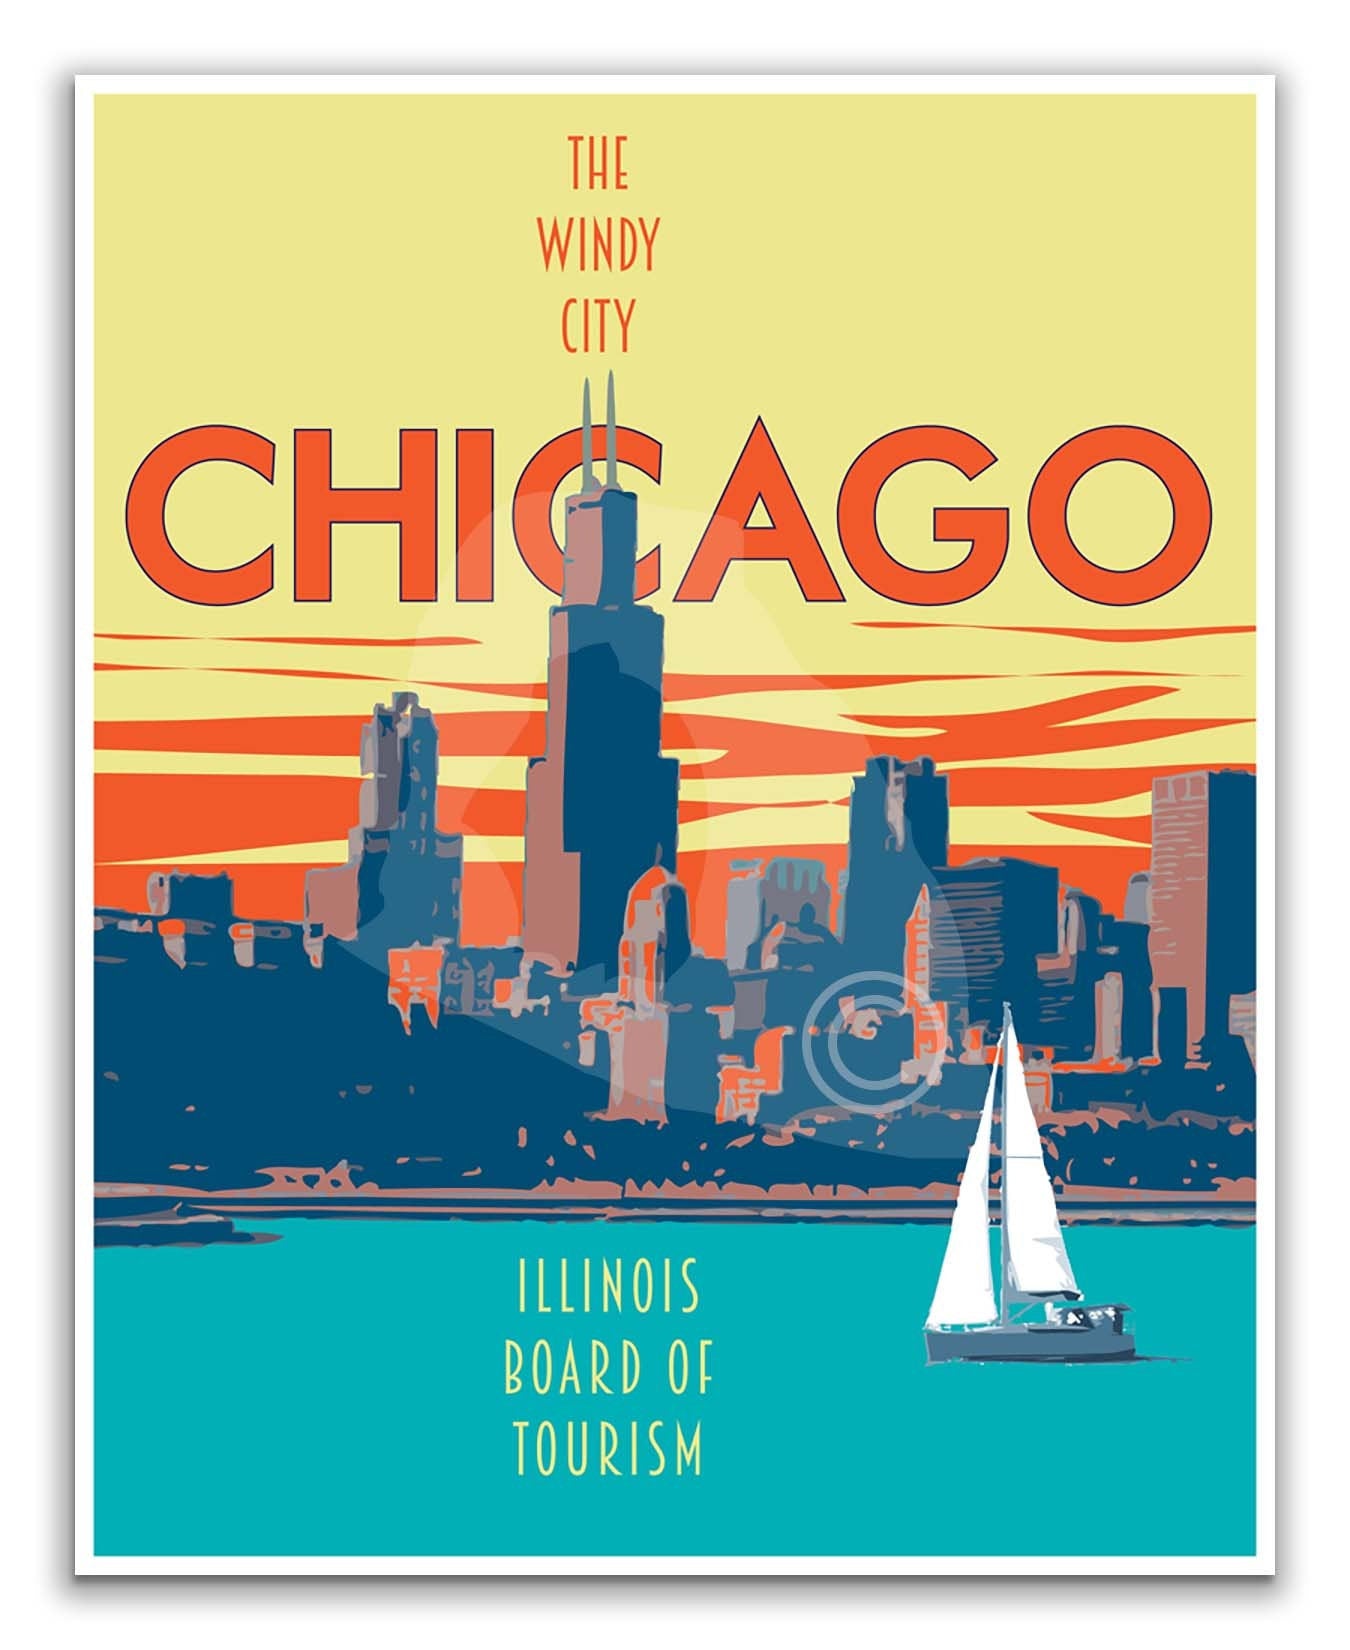 Chicago Illinois Travel Print, Chicago Cityscape Poster, Vintage Style Travel Poster, Chicago Lakefront Art